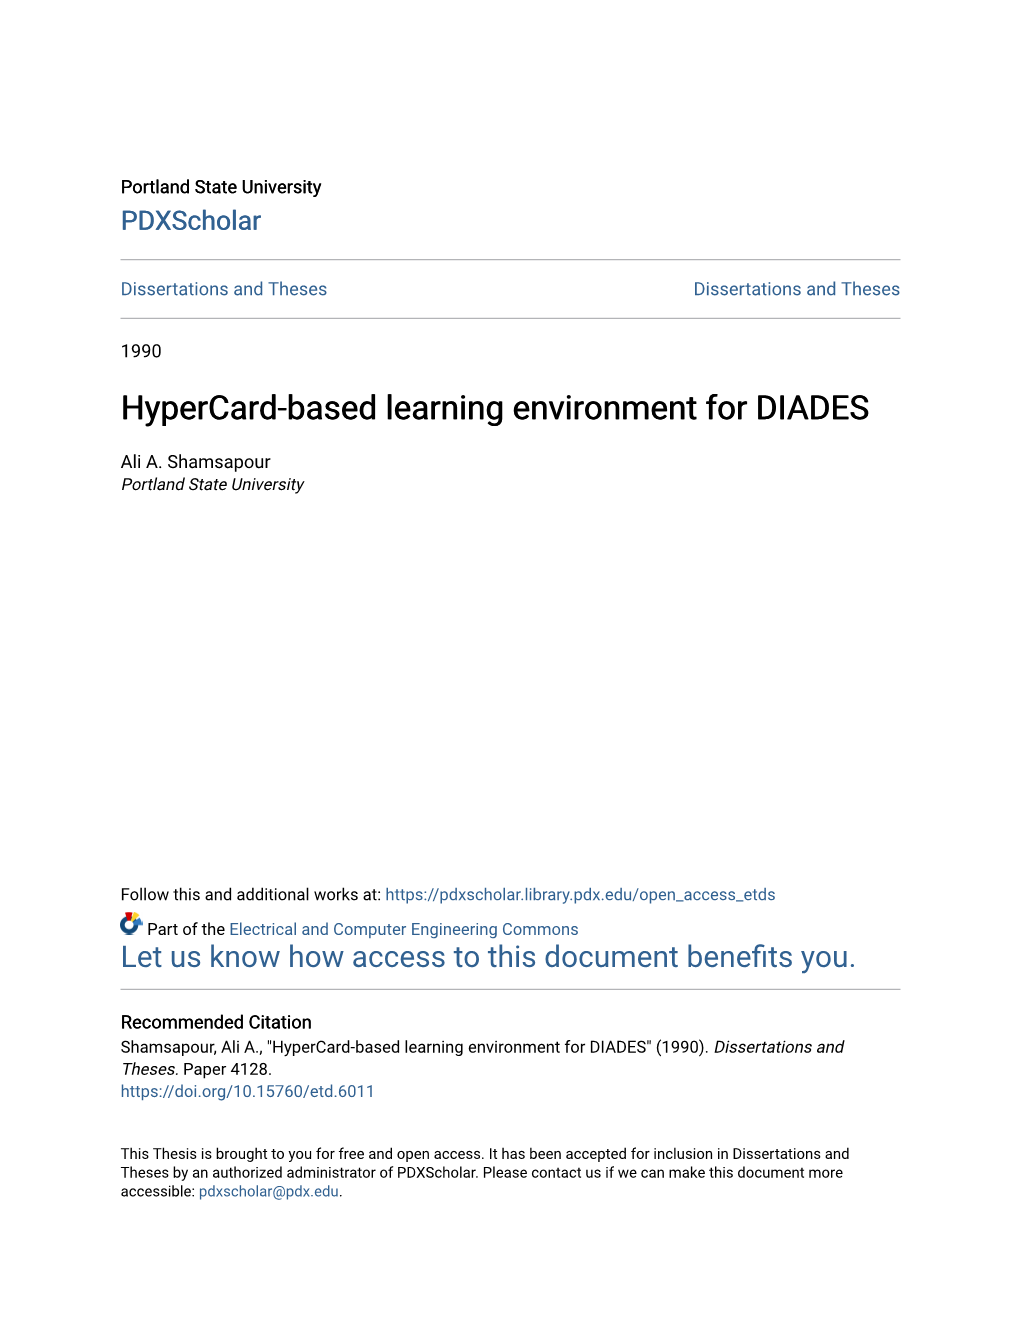 Hypercard-Based Learning Environment for DIADES